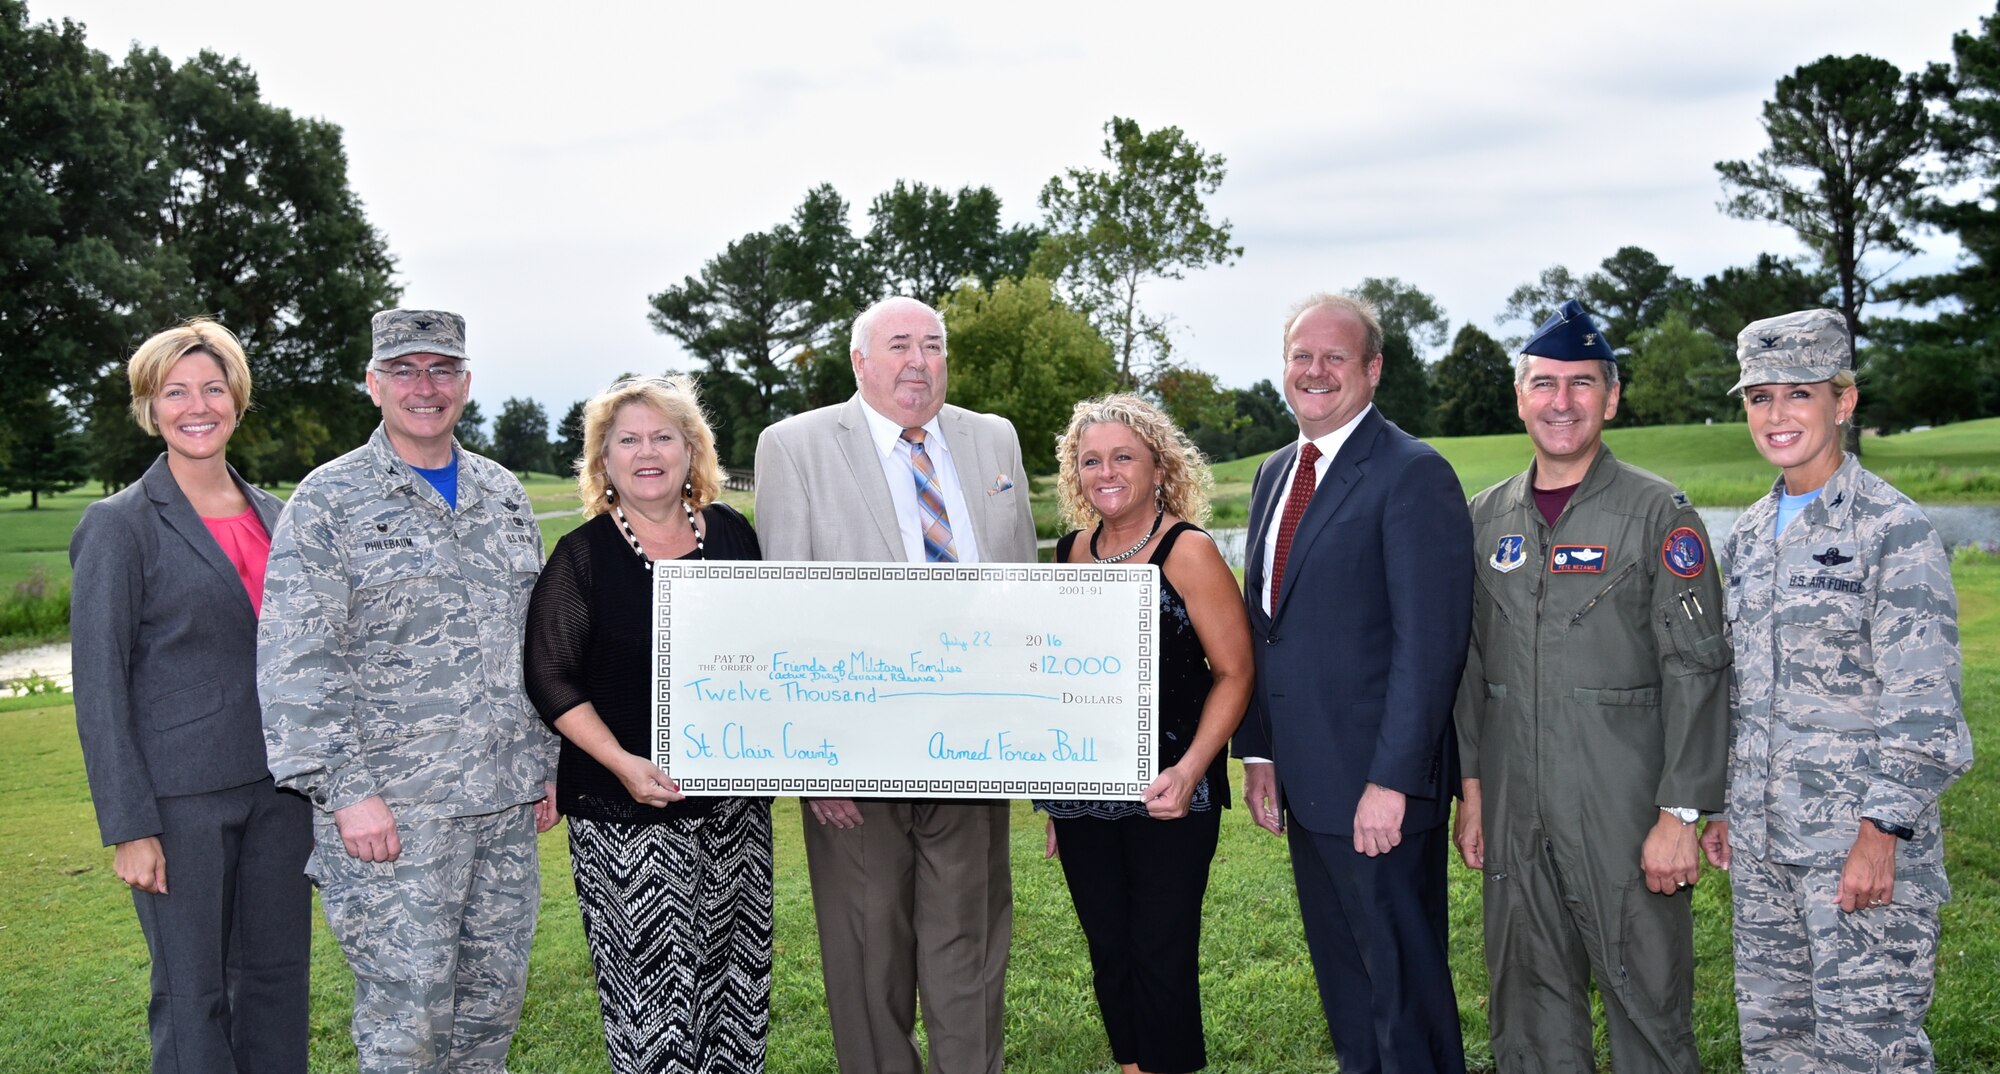 Civic leaders from the St. Clair County Armed Forces Ball Committee presented a check to Scott Air Force Base commanders and representatives for Friends of Military Families, Friends of the 932nd Airlift Wing, and 126th Refueling Wing July 22, 2016, Scott Air Force Base, Illinois.  The donation will be divided among the private organizations that provide support to active duty, reserve and air national guard Airmen and their families. The committee raised the funds as part of their 2nd Annual Armed Forces Ball, which was organized to honor military service members, past and present. The inaugural event took place May 8, 2015, in Fairview Heights, Illinois. (U.S. Air Force photo/Christopher Parr) 